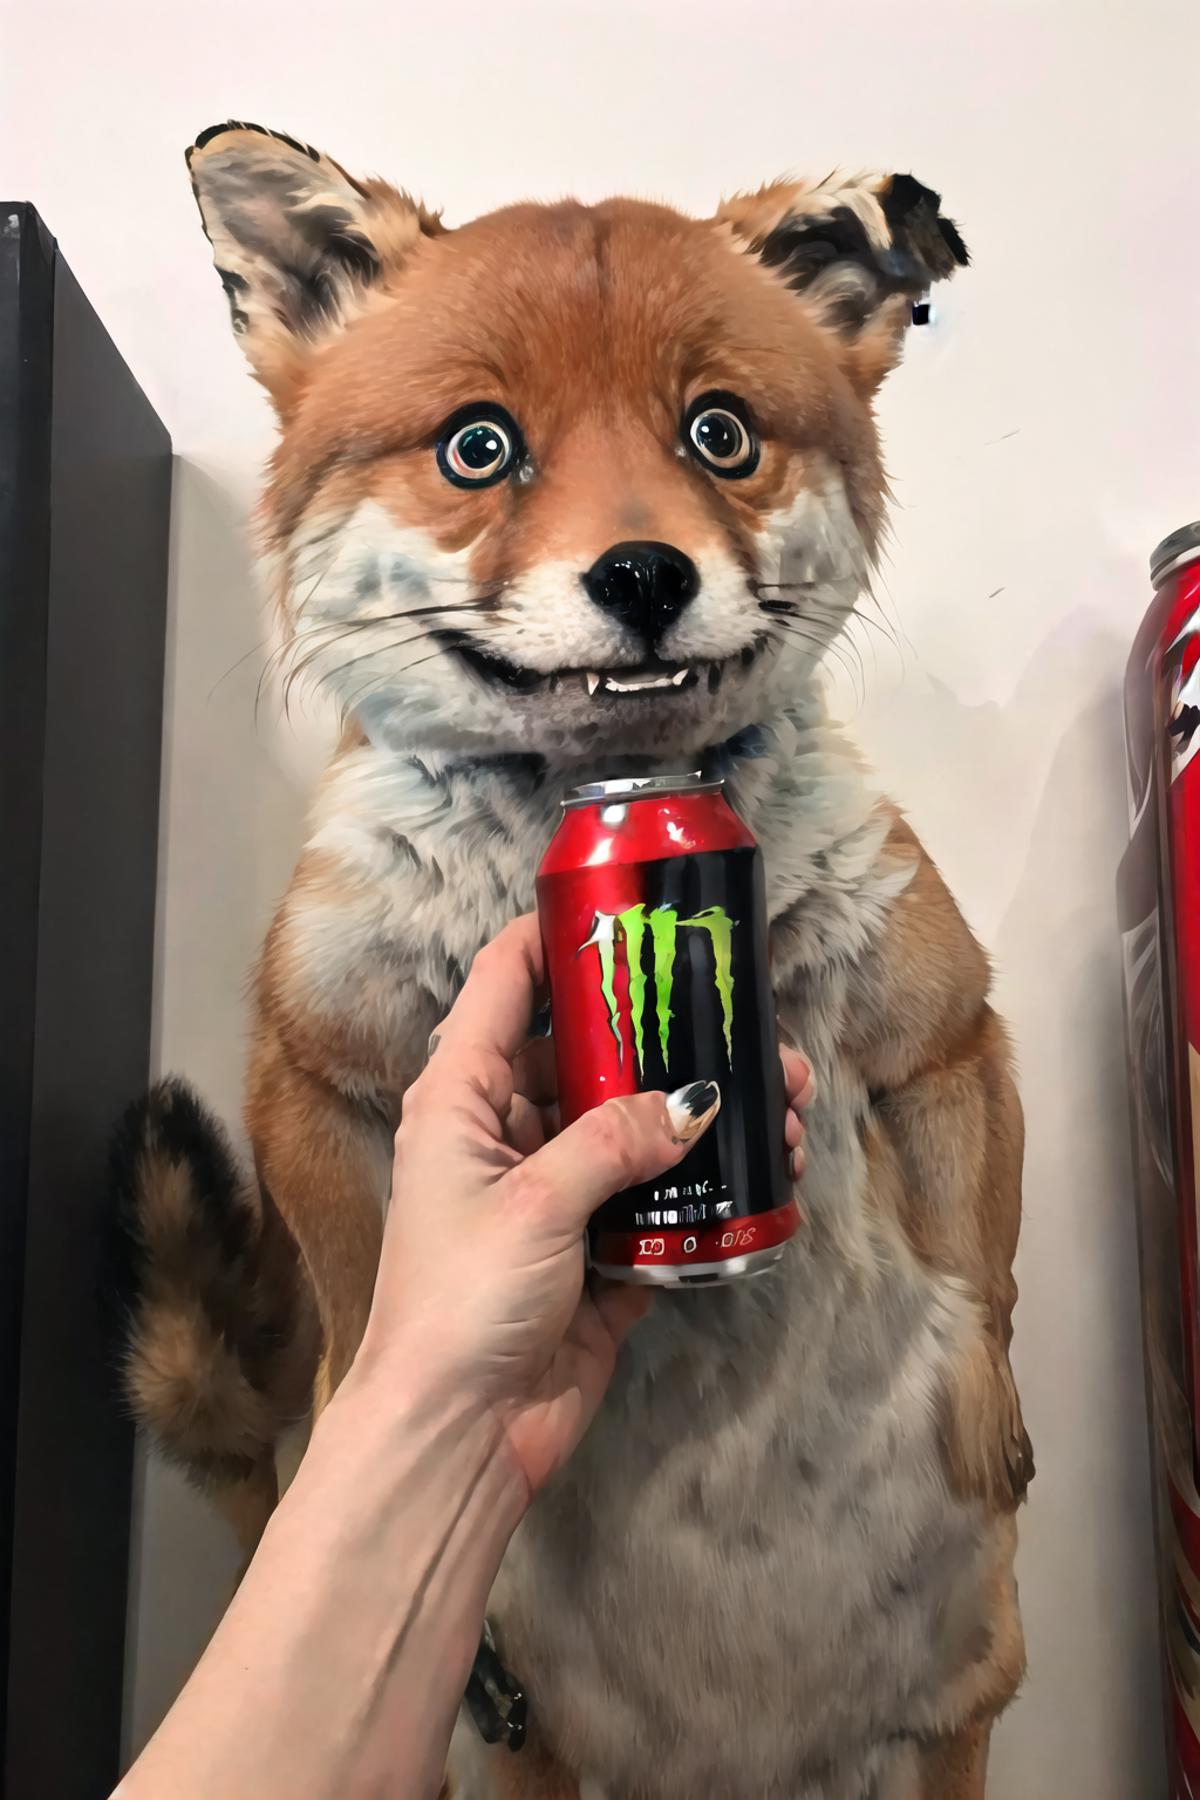 Holding Monster Energy | Concept LoRA image by FallenIncursio